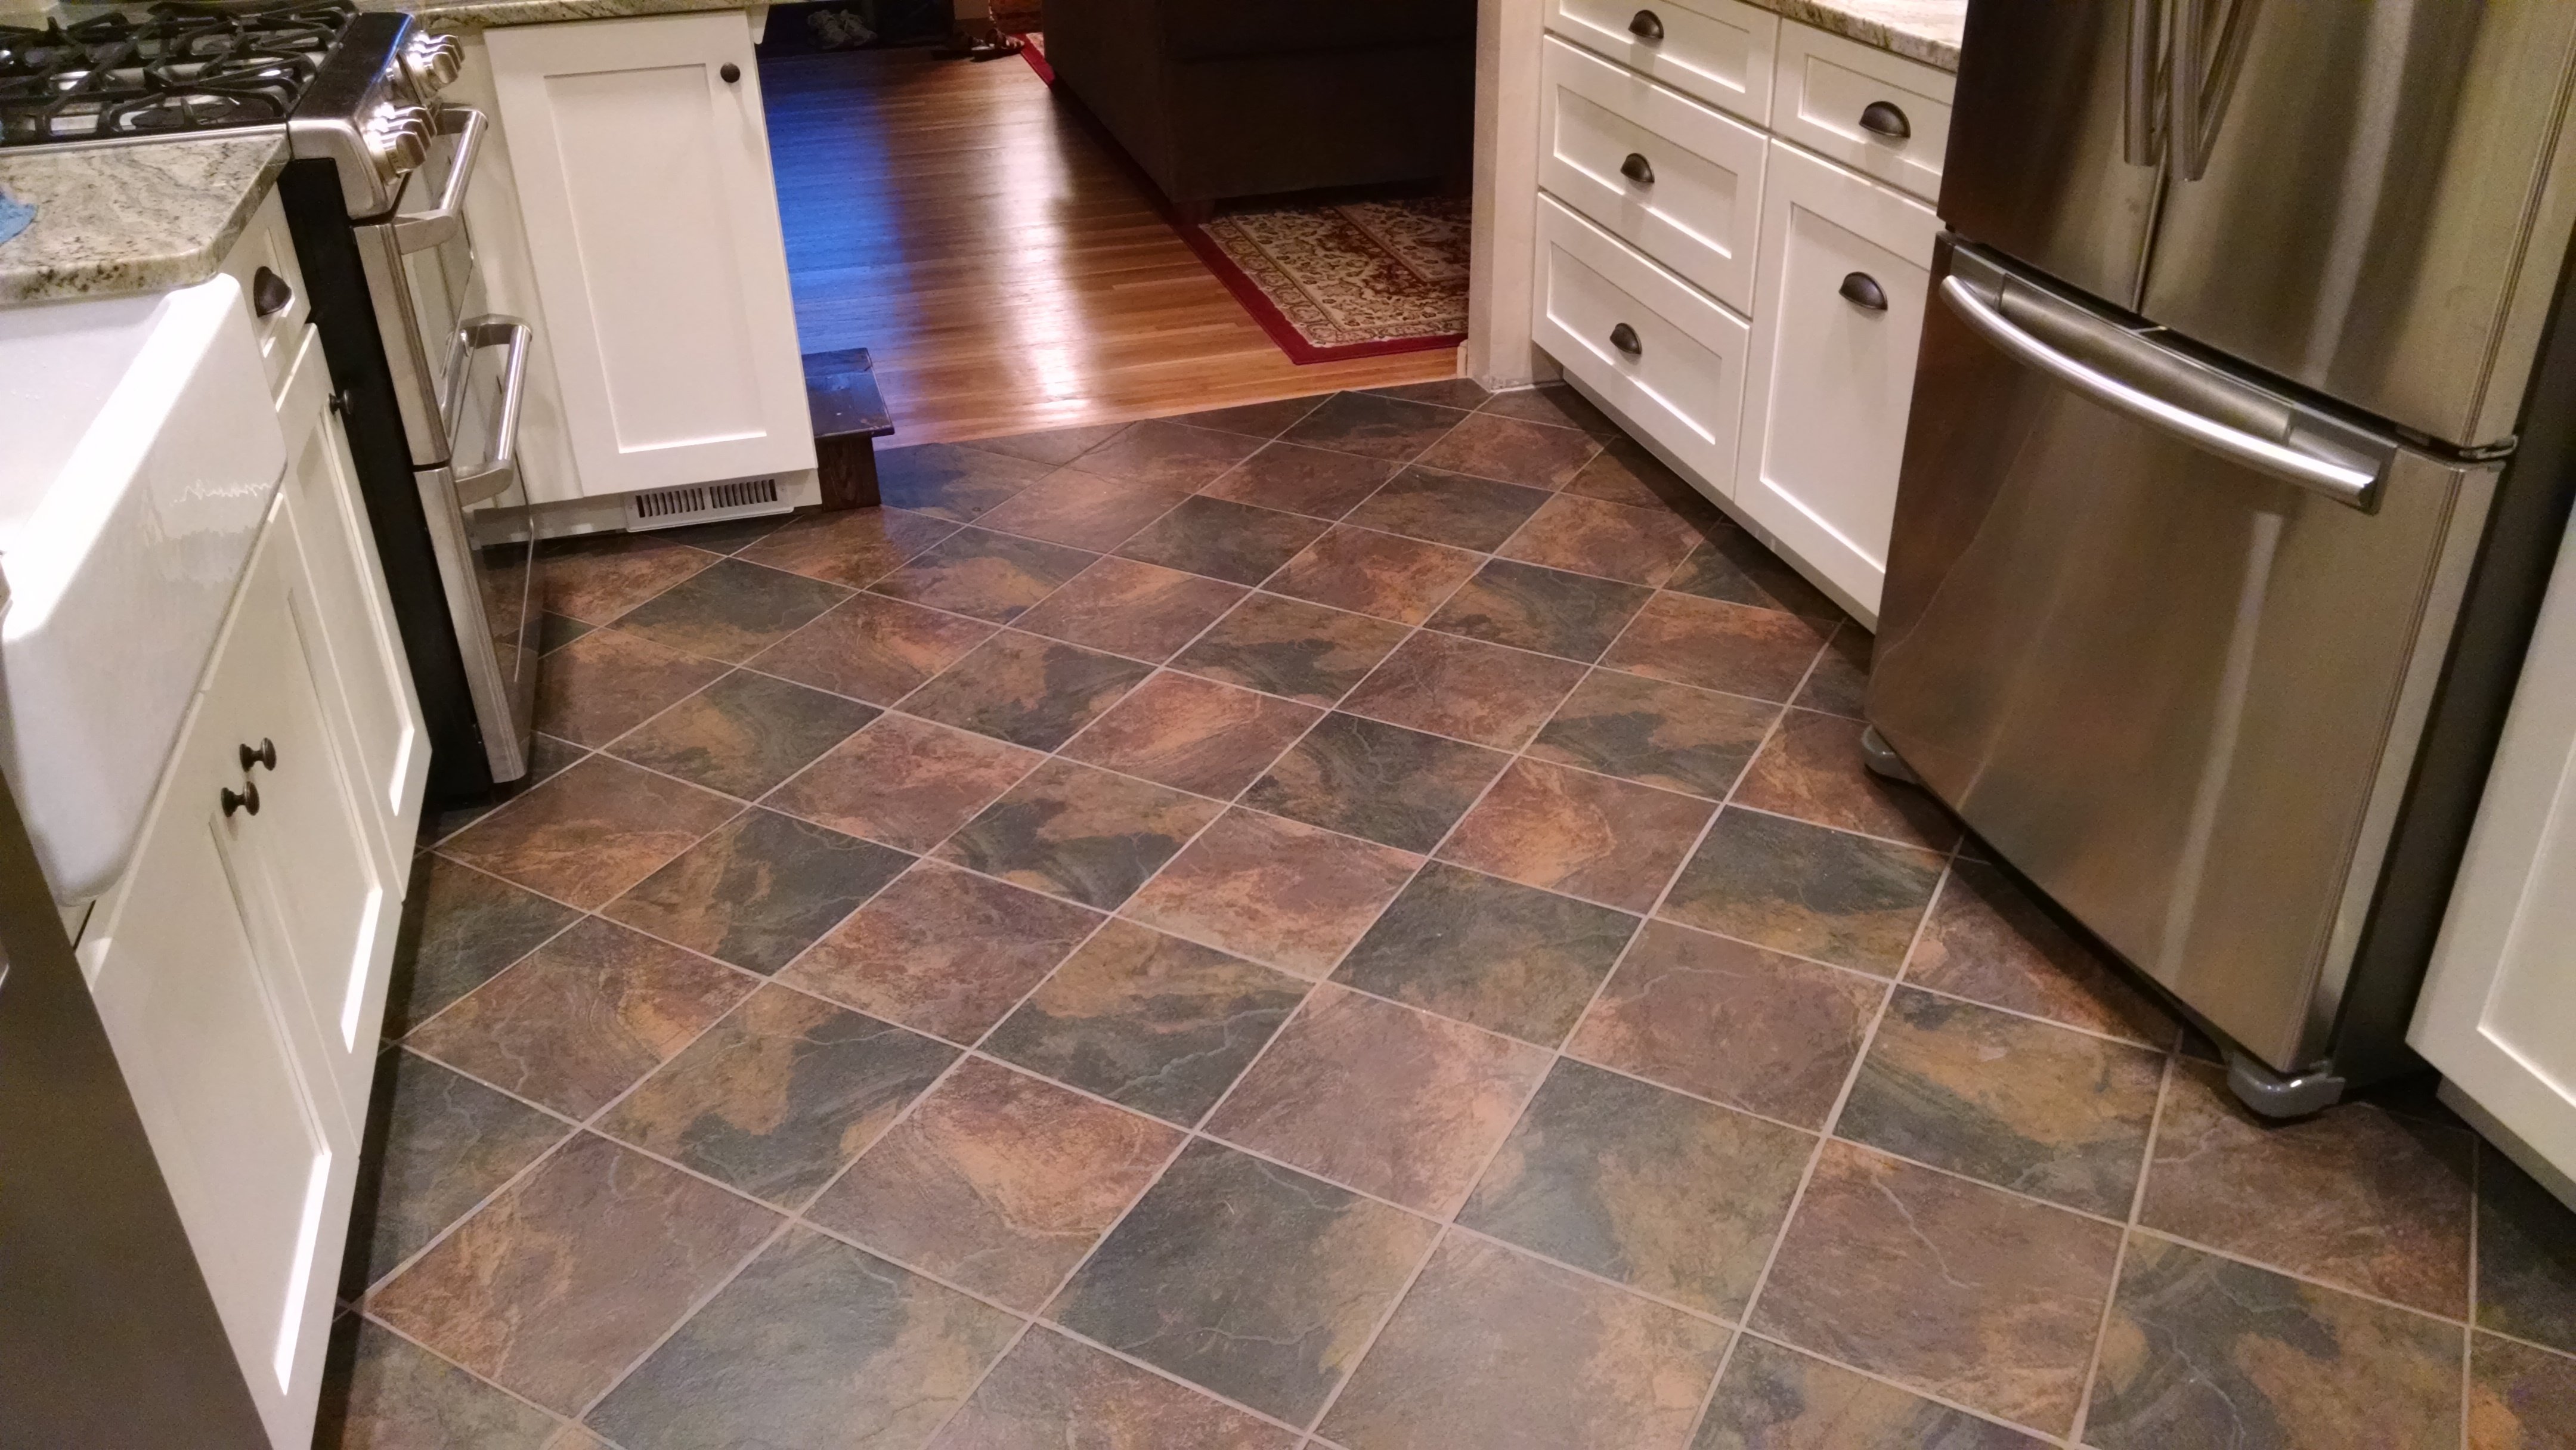 How to Know When it's Time to Replace Your Flooring